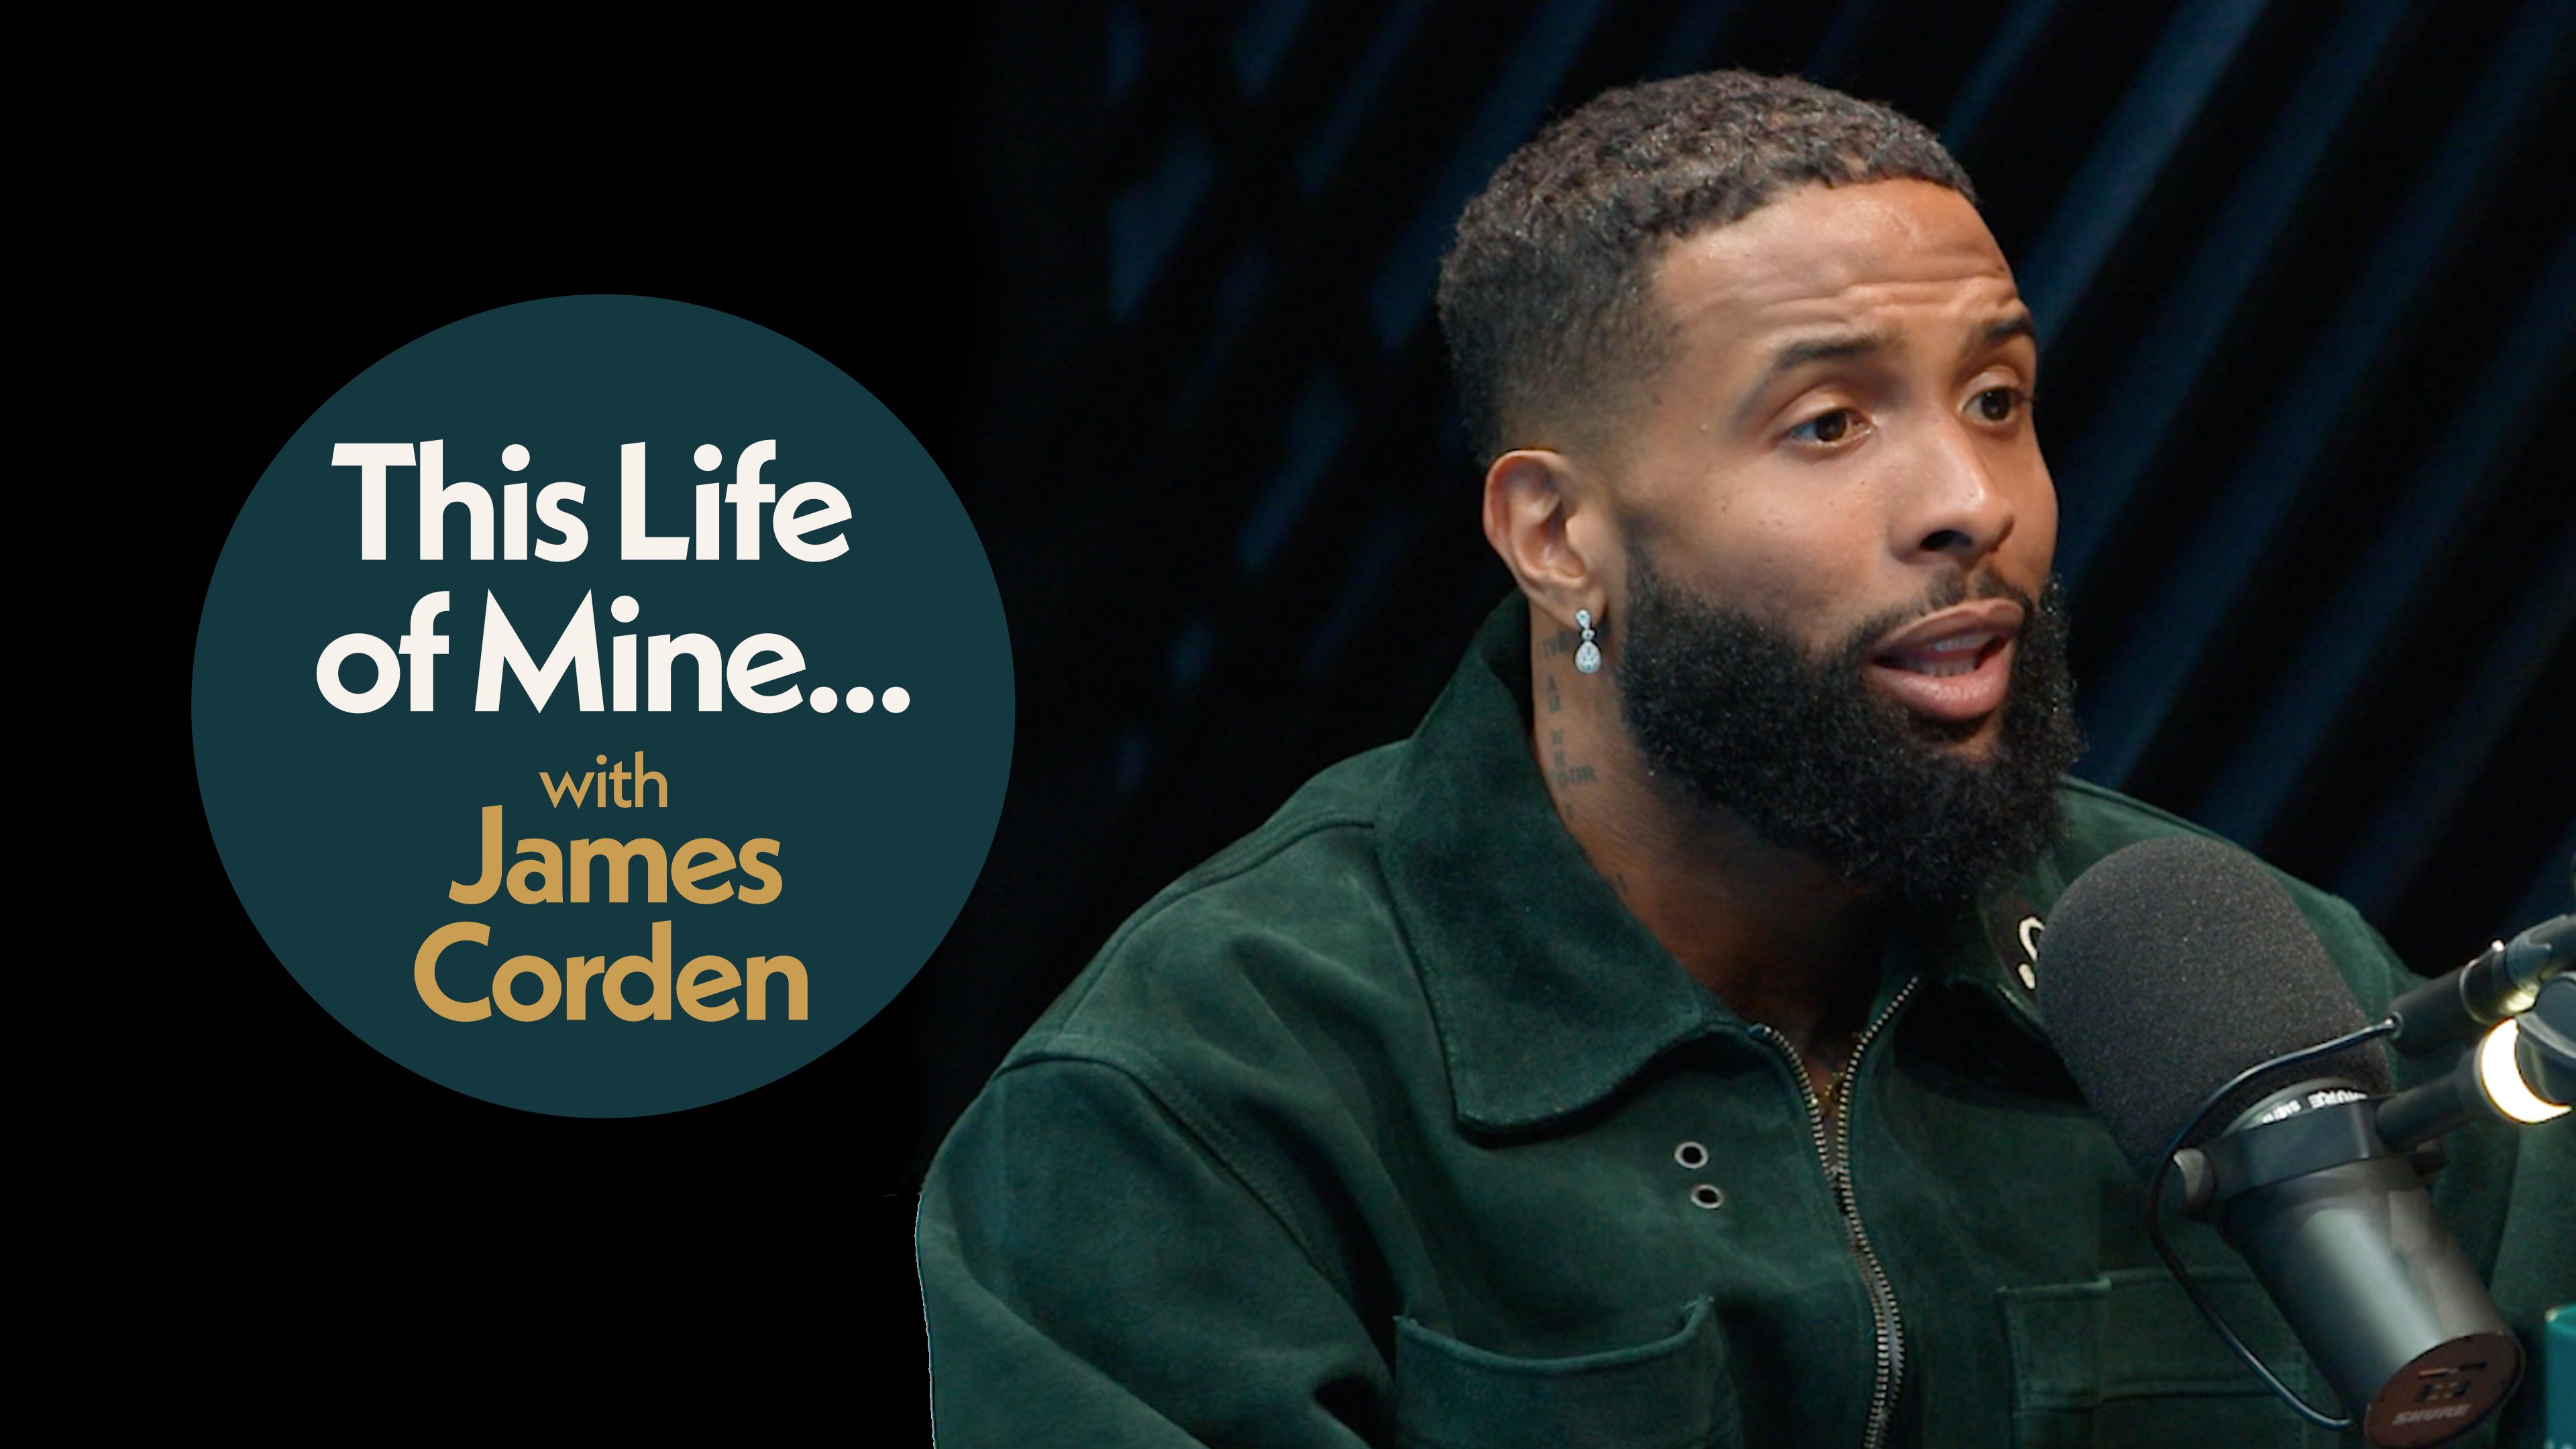 Odell Beckham Jr. on "This Life of Mine with James Corden"